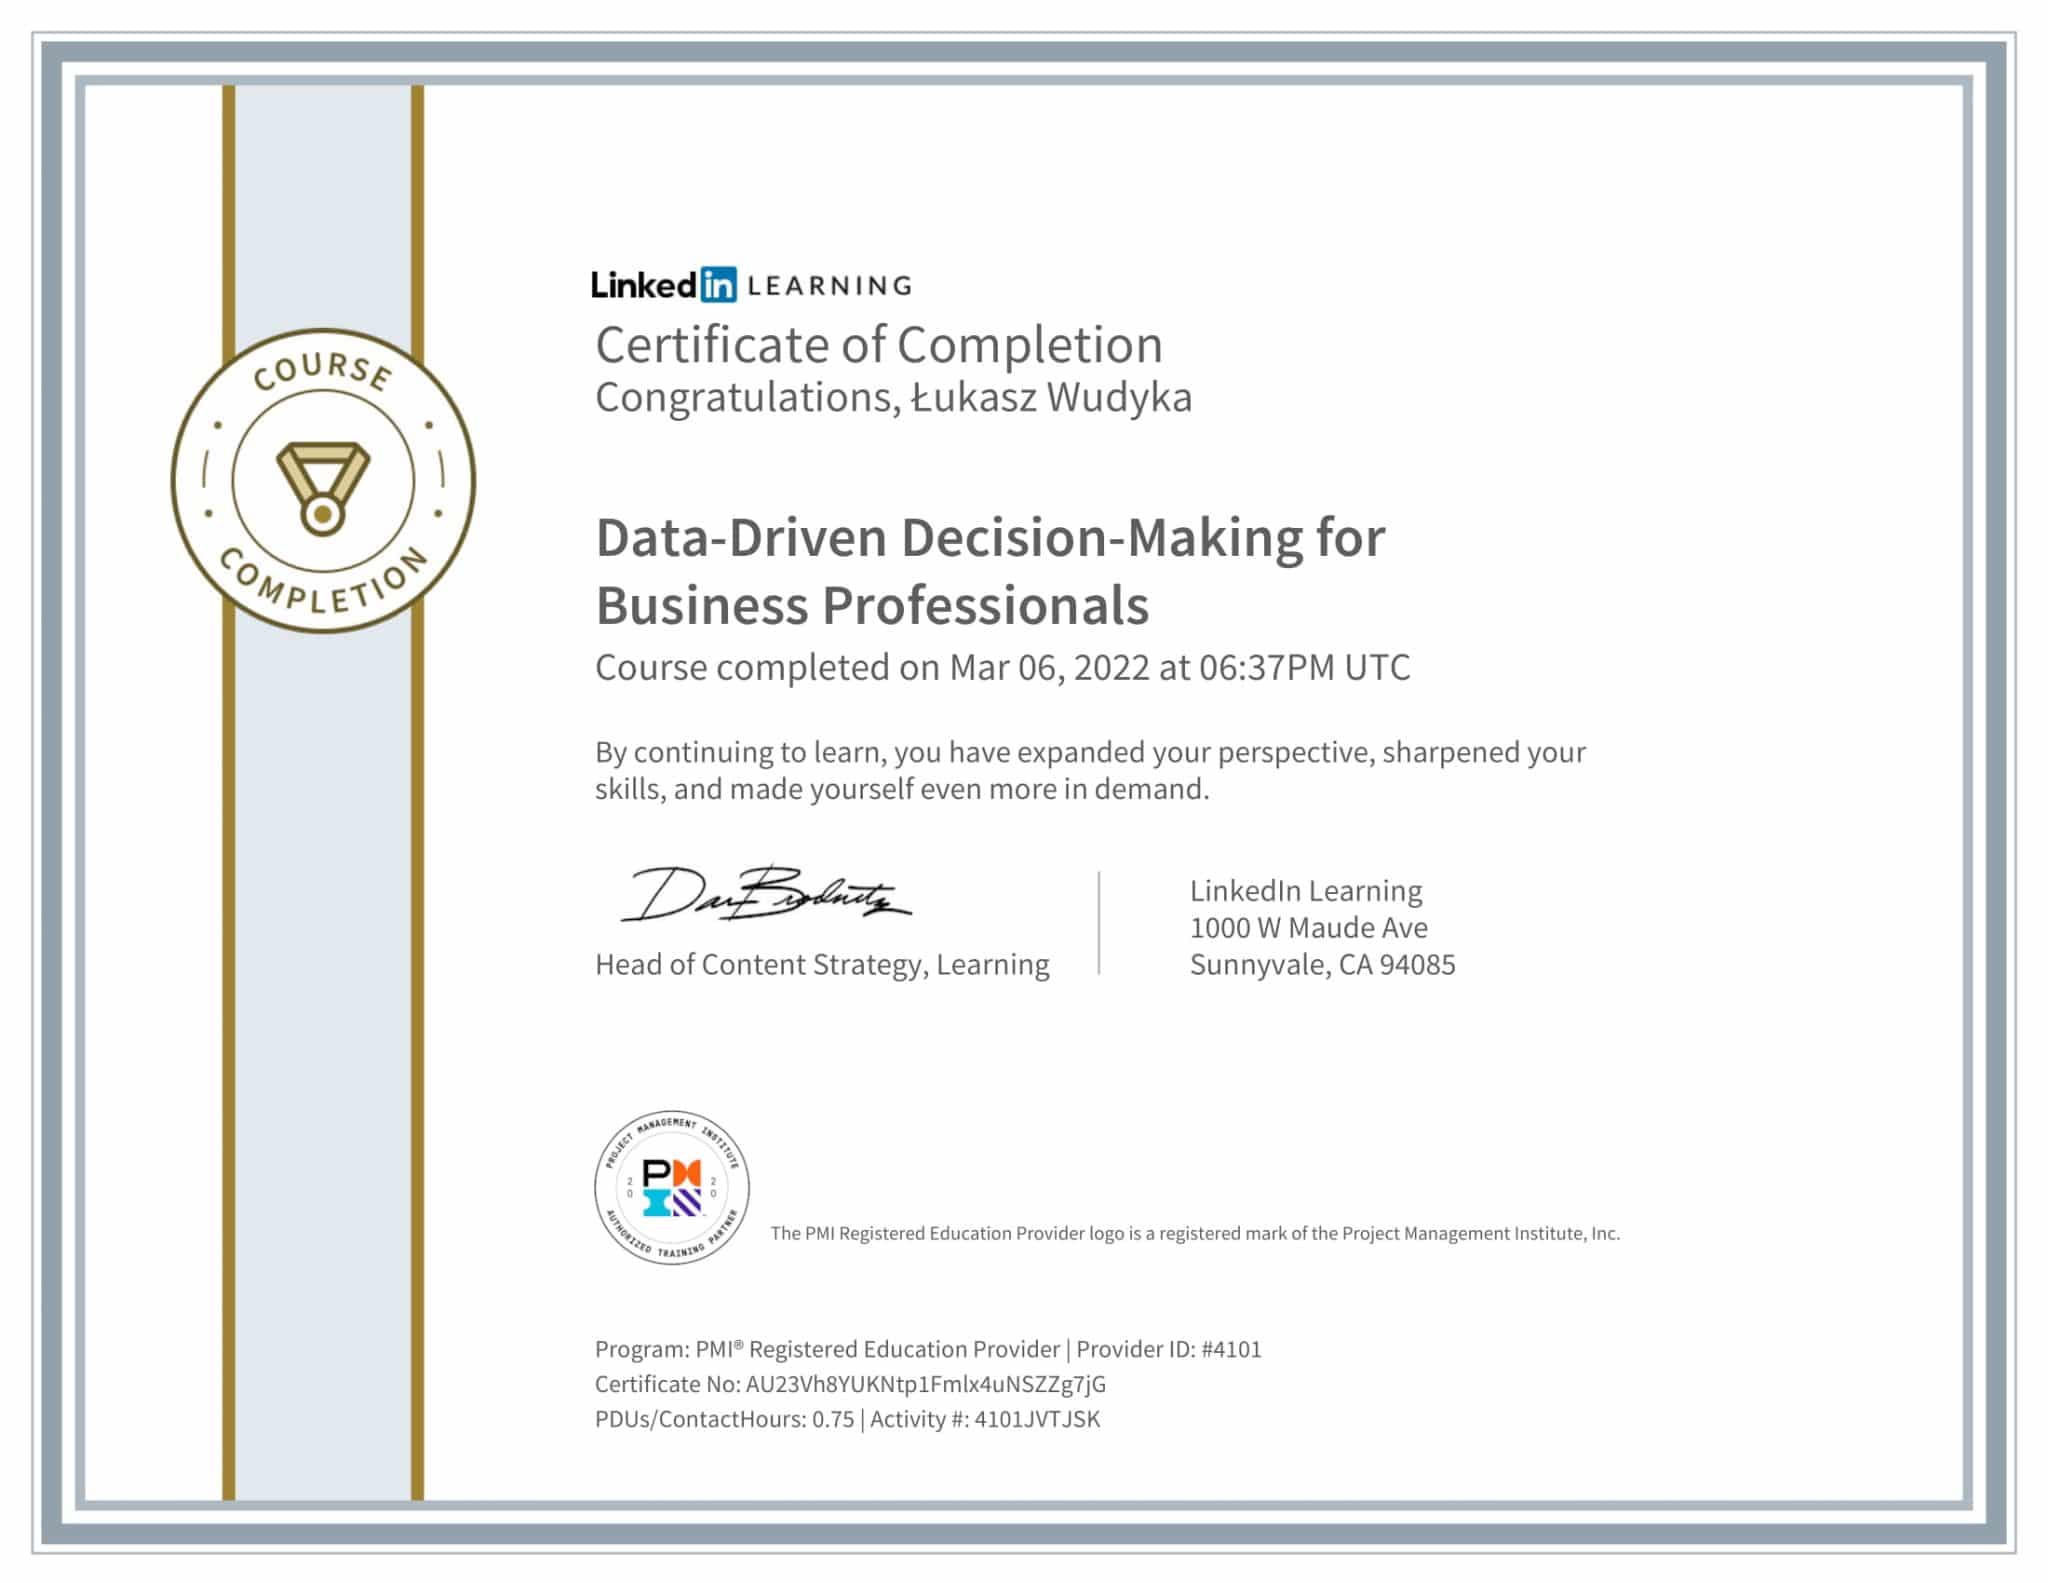 CertificateOfCompletion_DataDriven DecisionMaking for Business Professionals (1)-1